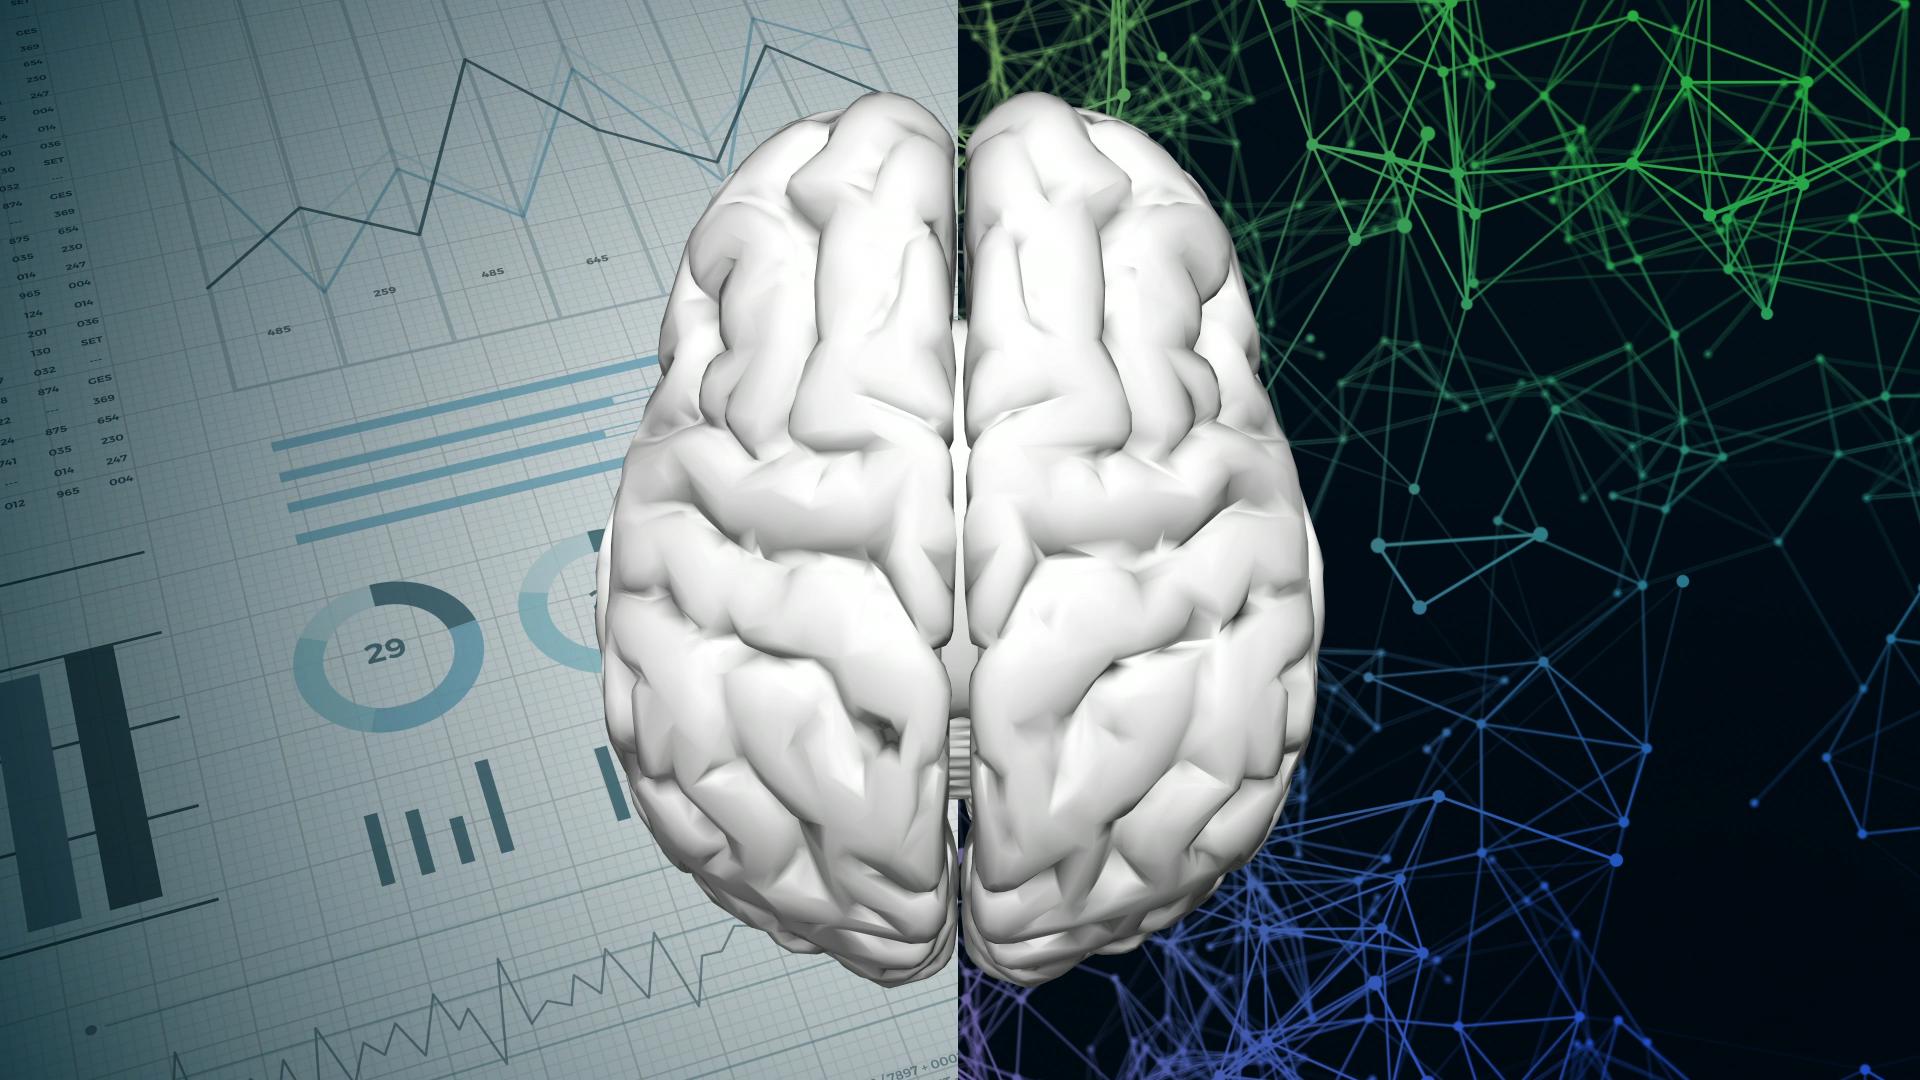 An image with graphs and the human brain 